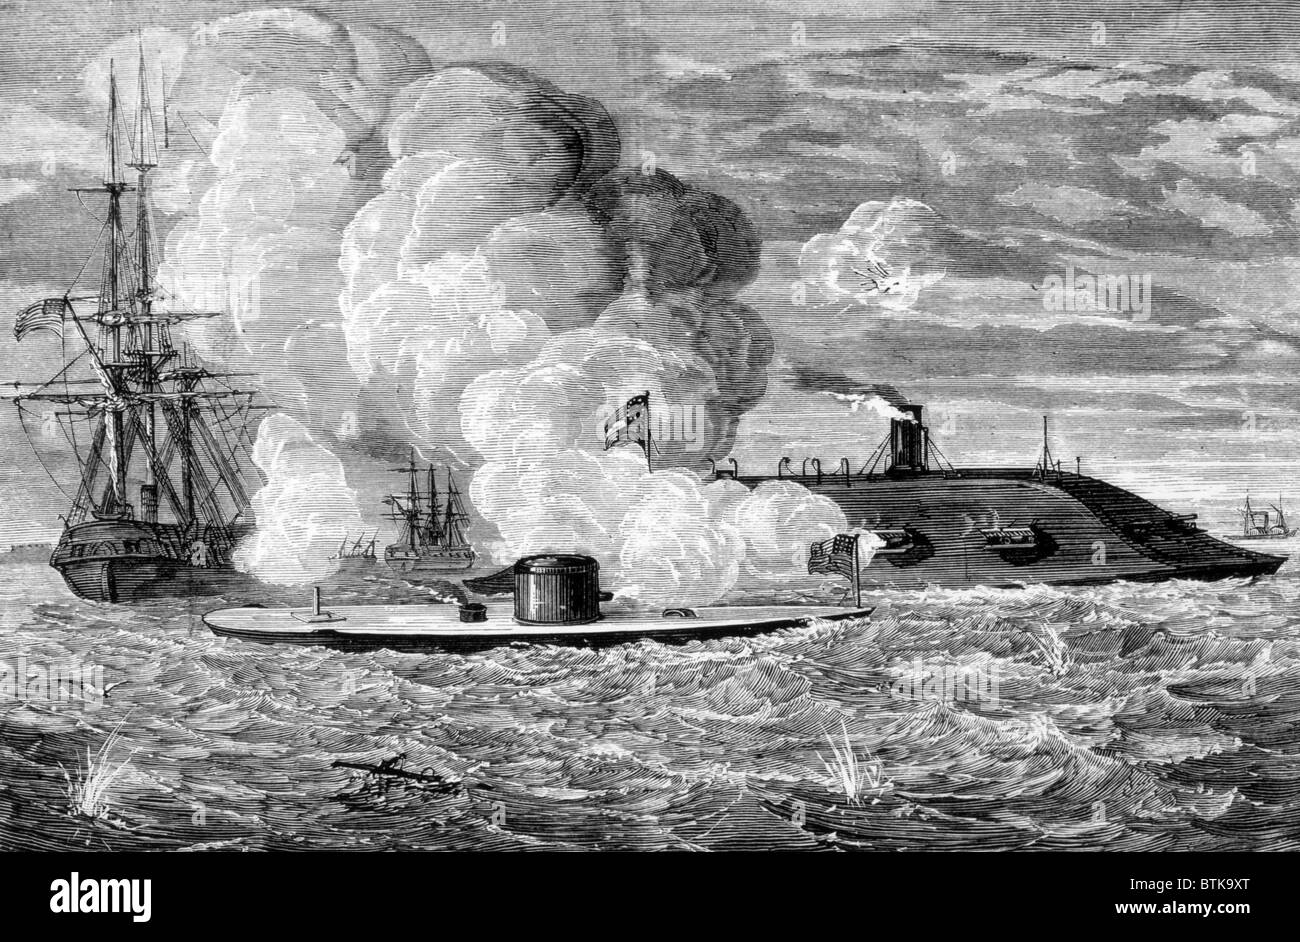 Naval battle between the Monitor and the Merrimack, March 8, 1862 Stock Photo